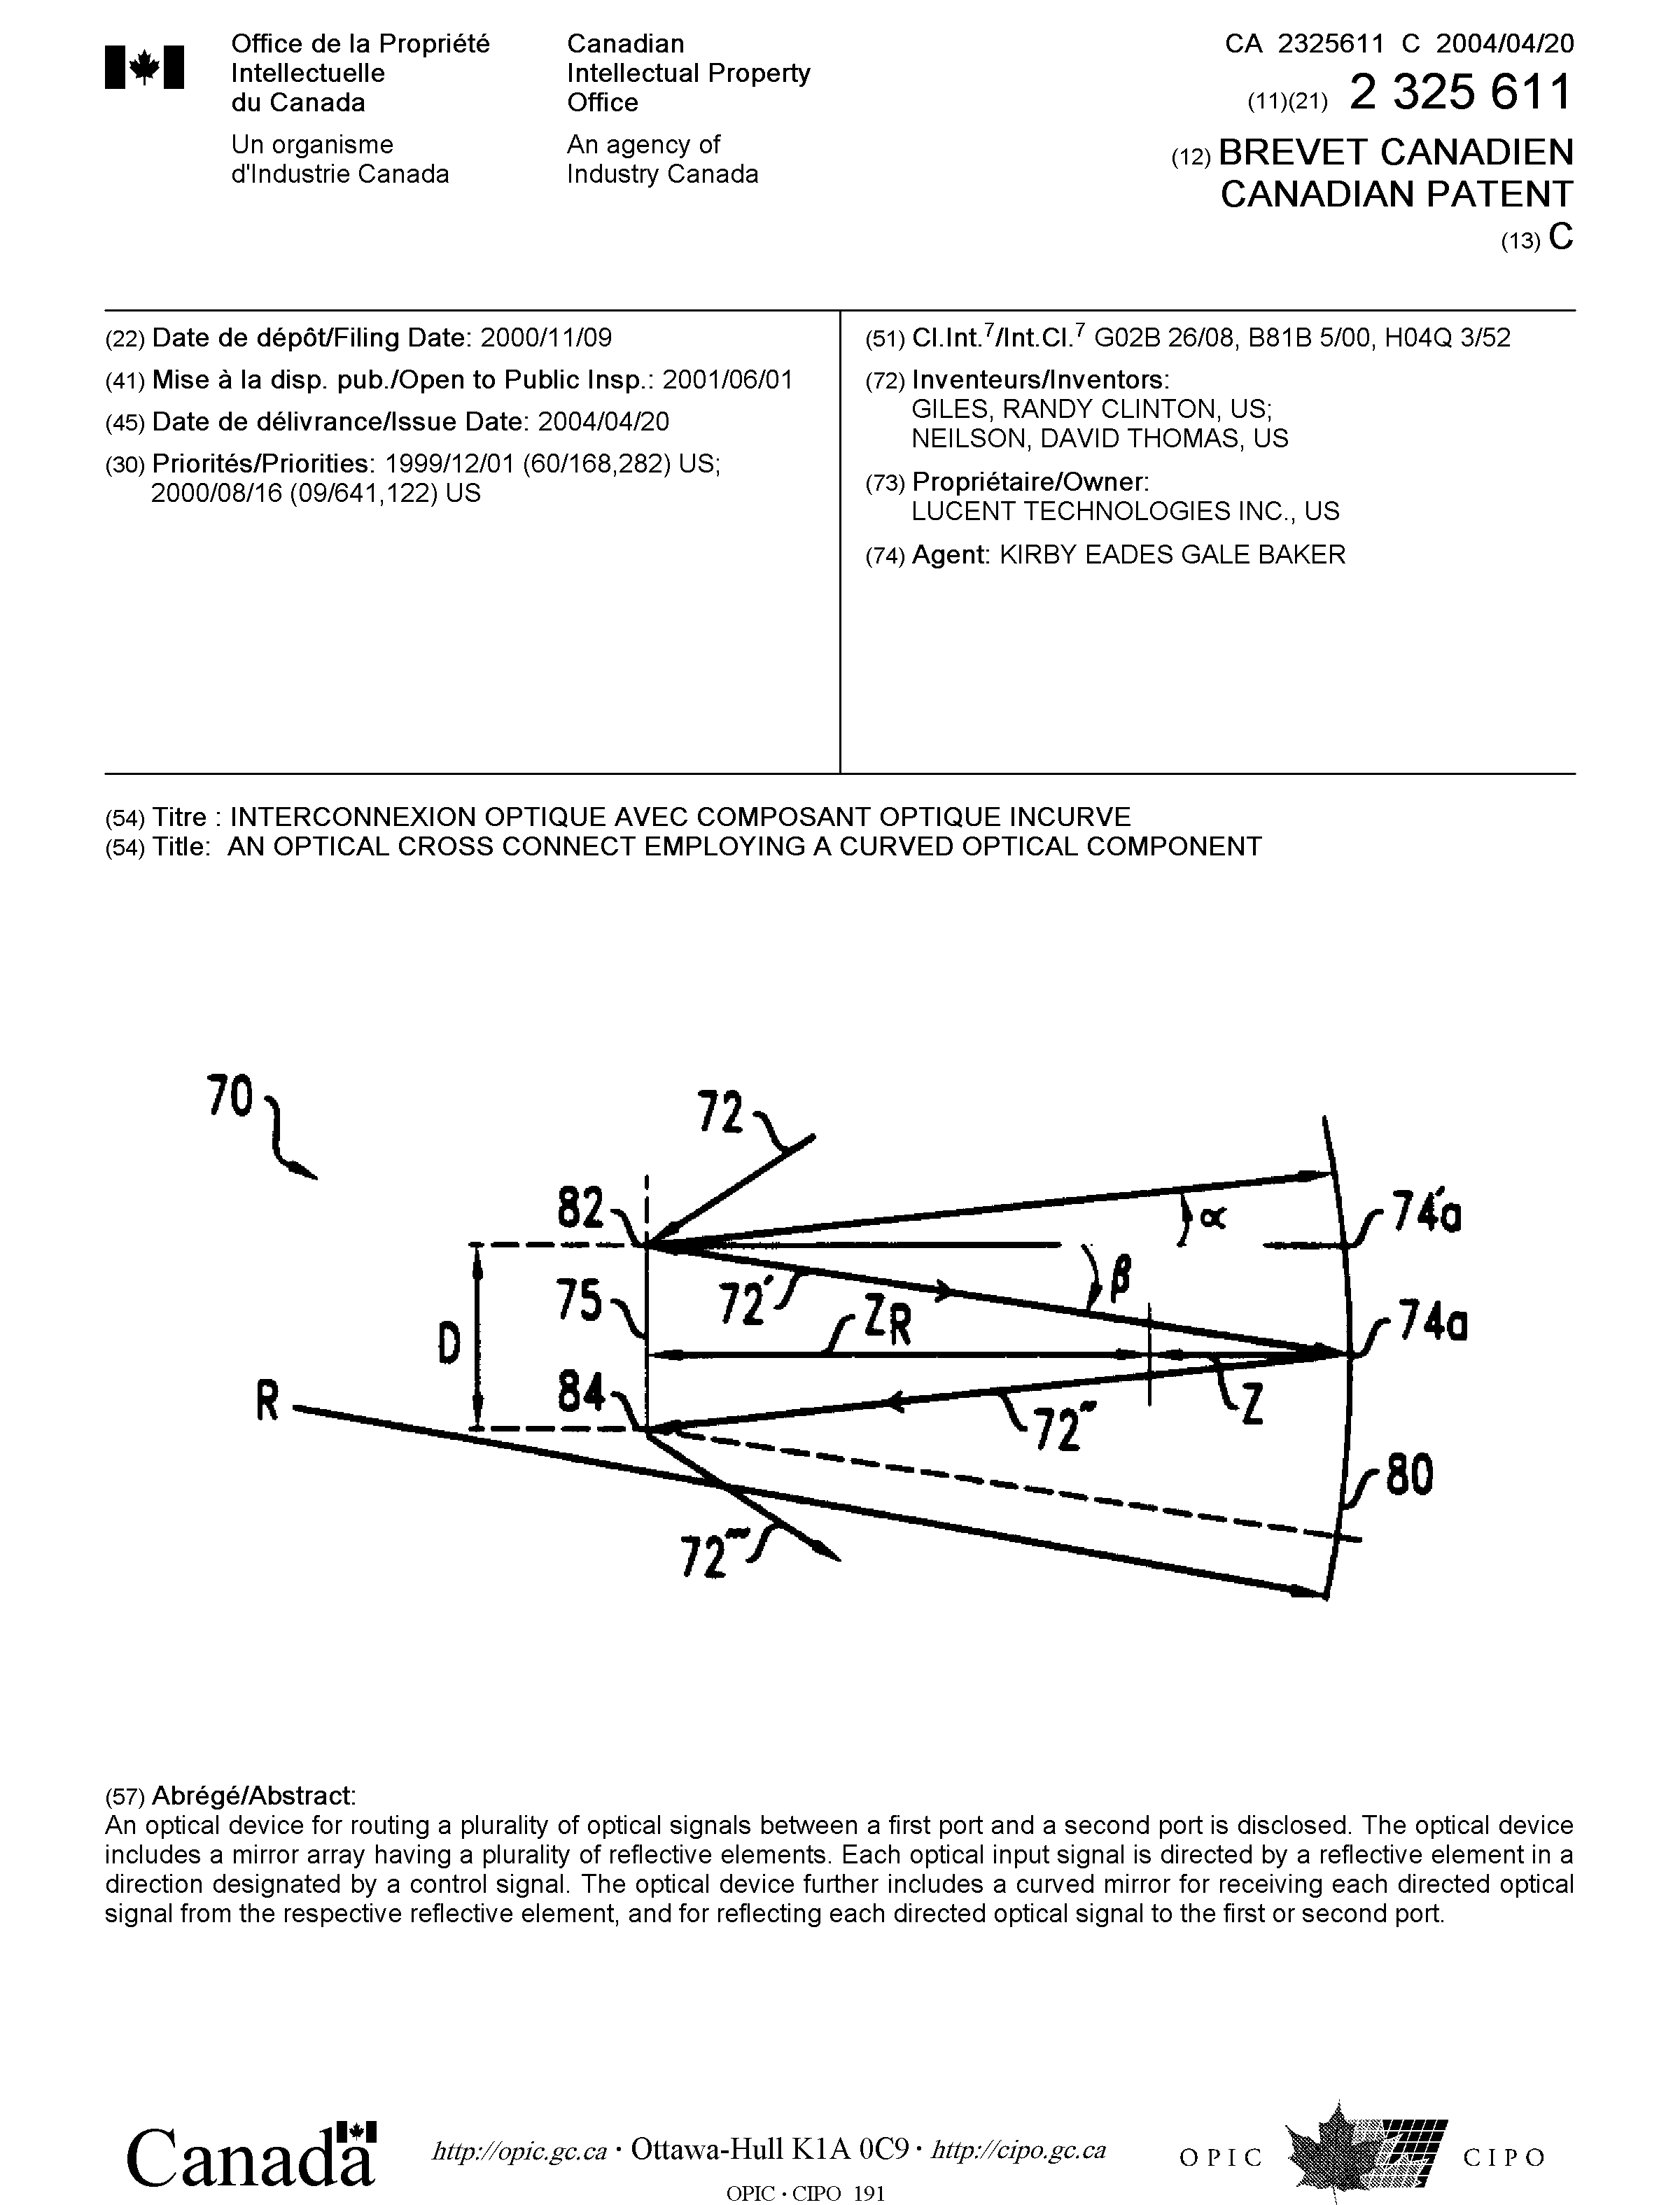 Canadian Patent Document 2325611. Cover Page 20040318. Image 1 of 1